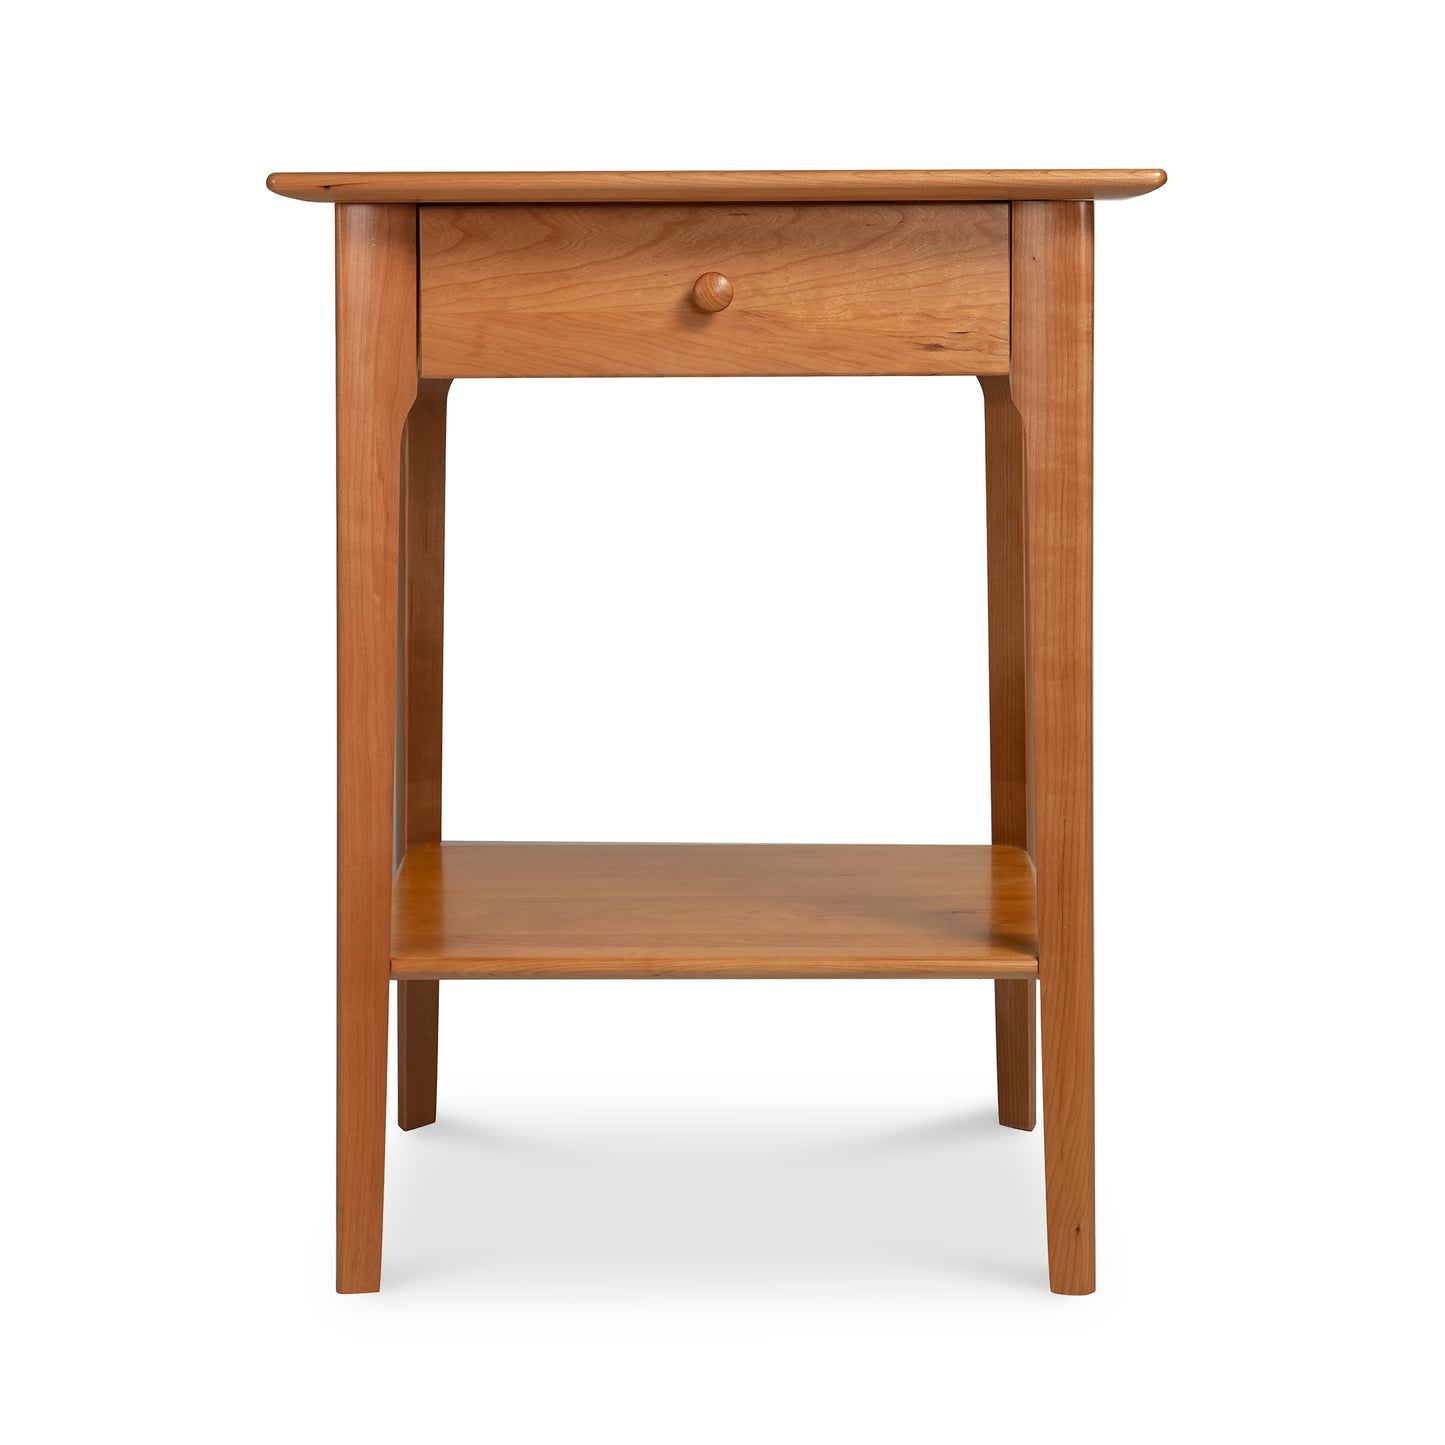 A small wooden Sarah 1-Drawer Open Shelf Nightstand, featuring a Shaker design, from Copeland Furniture.